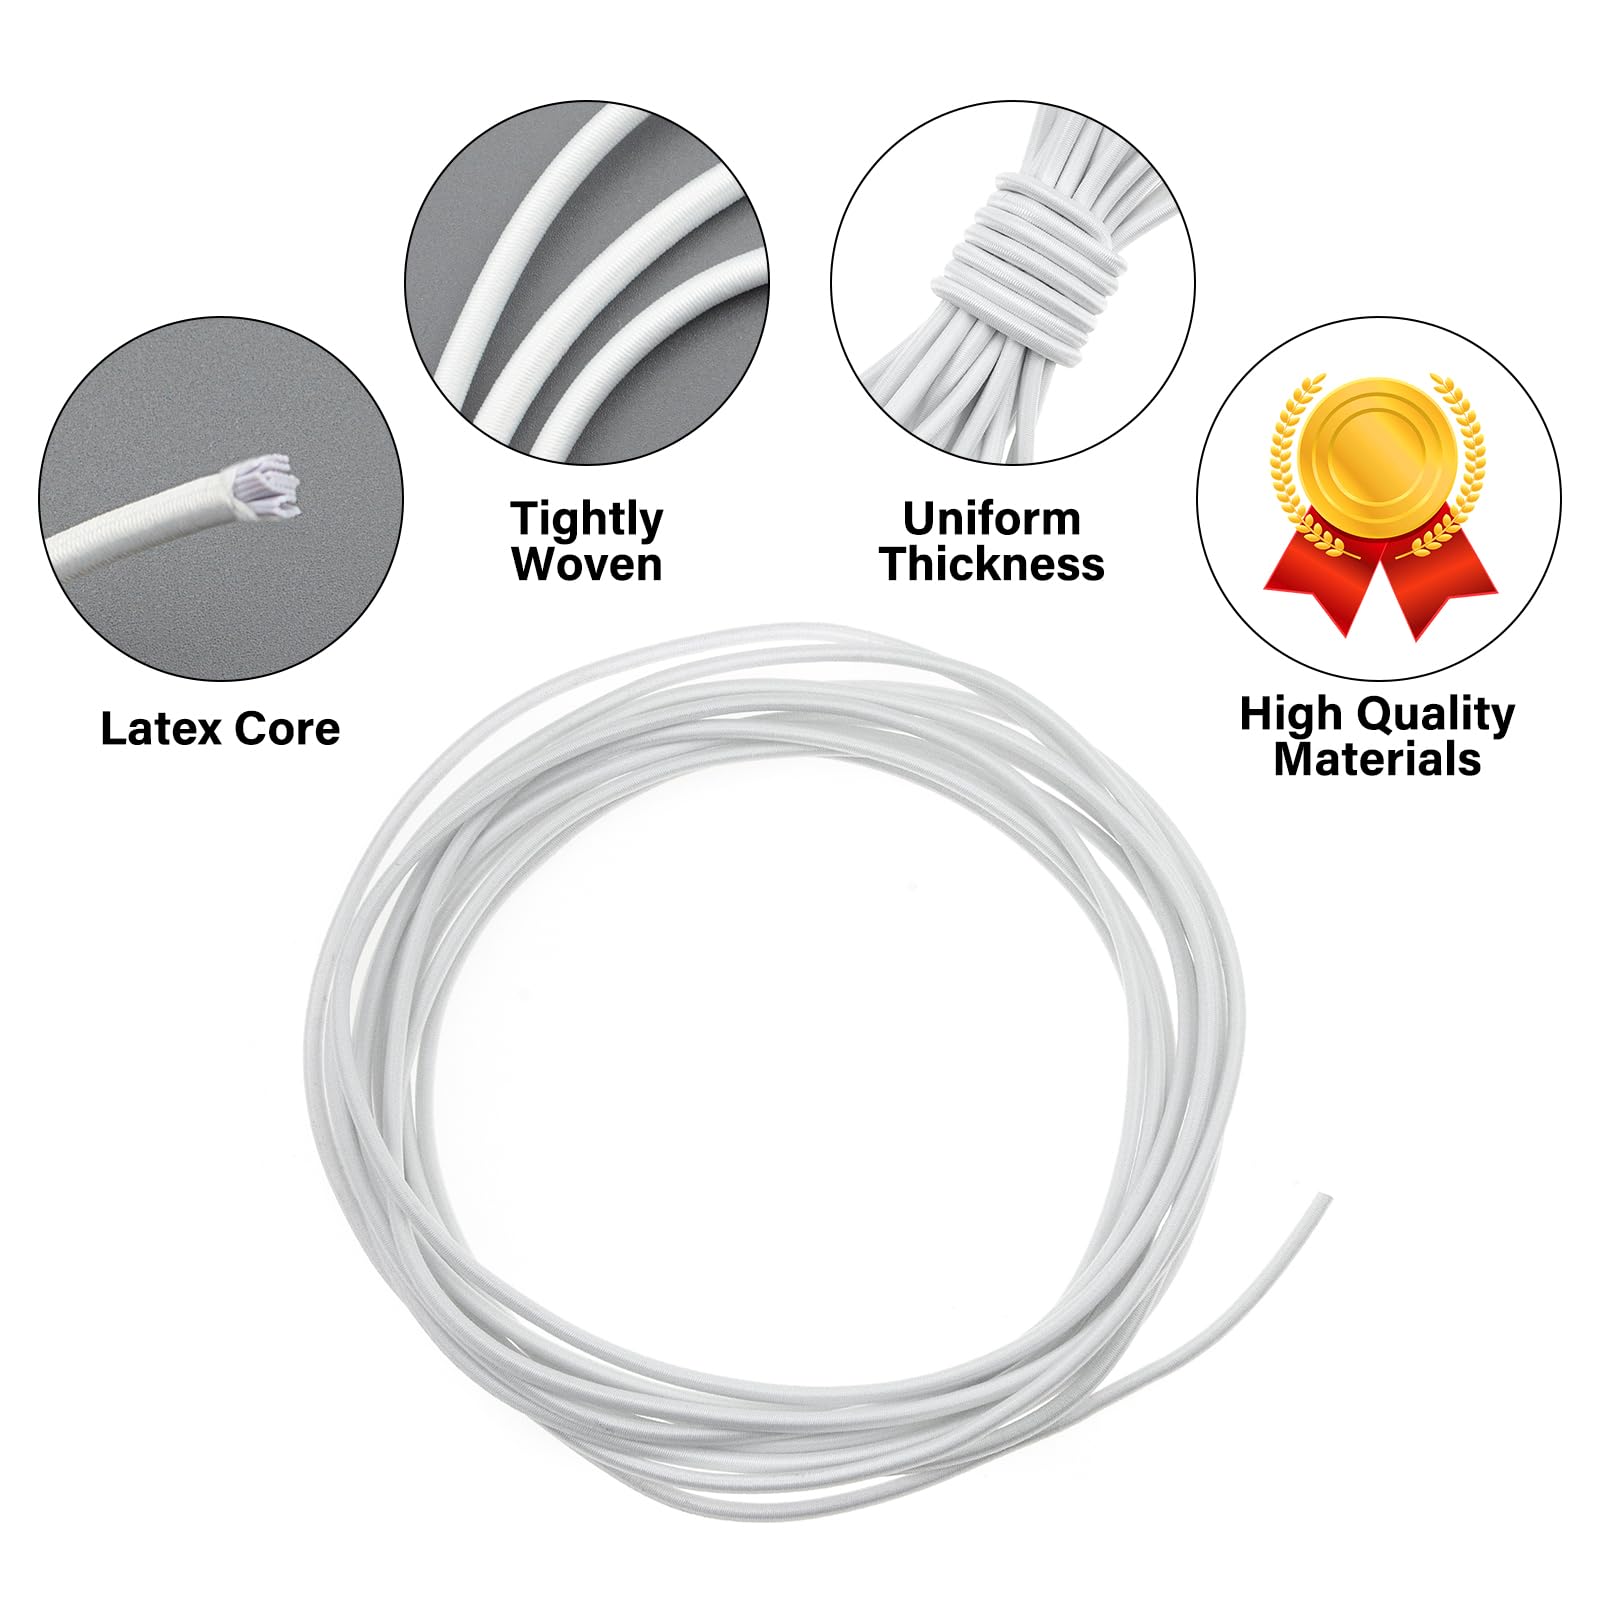 3MM White Elastic Cord 5 Meter Elastic String Bungee Cord Round Stretchy Cord Bungee Rope Multifunctional Drawstring Elastic for Backpack Tent Poles DIY Craft Projects Camping